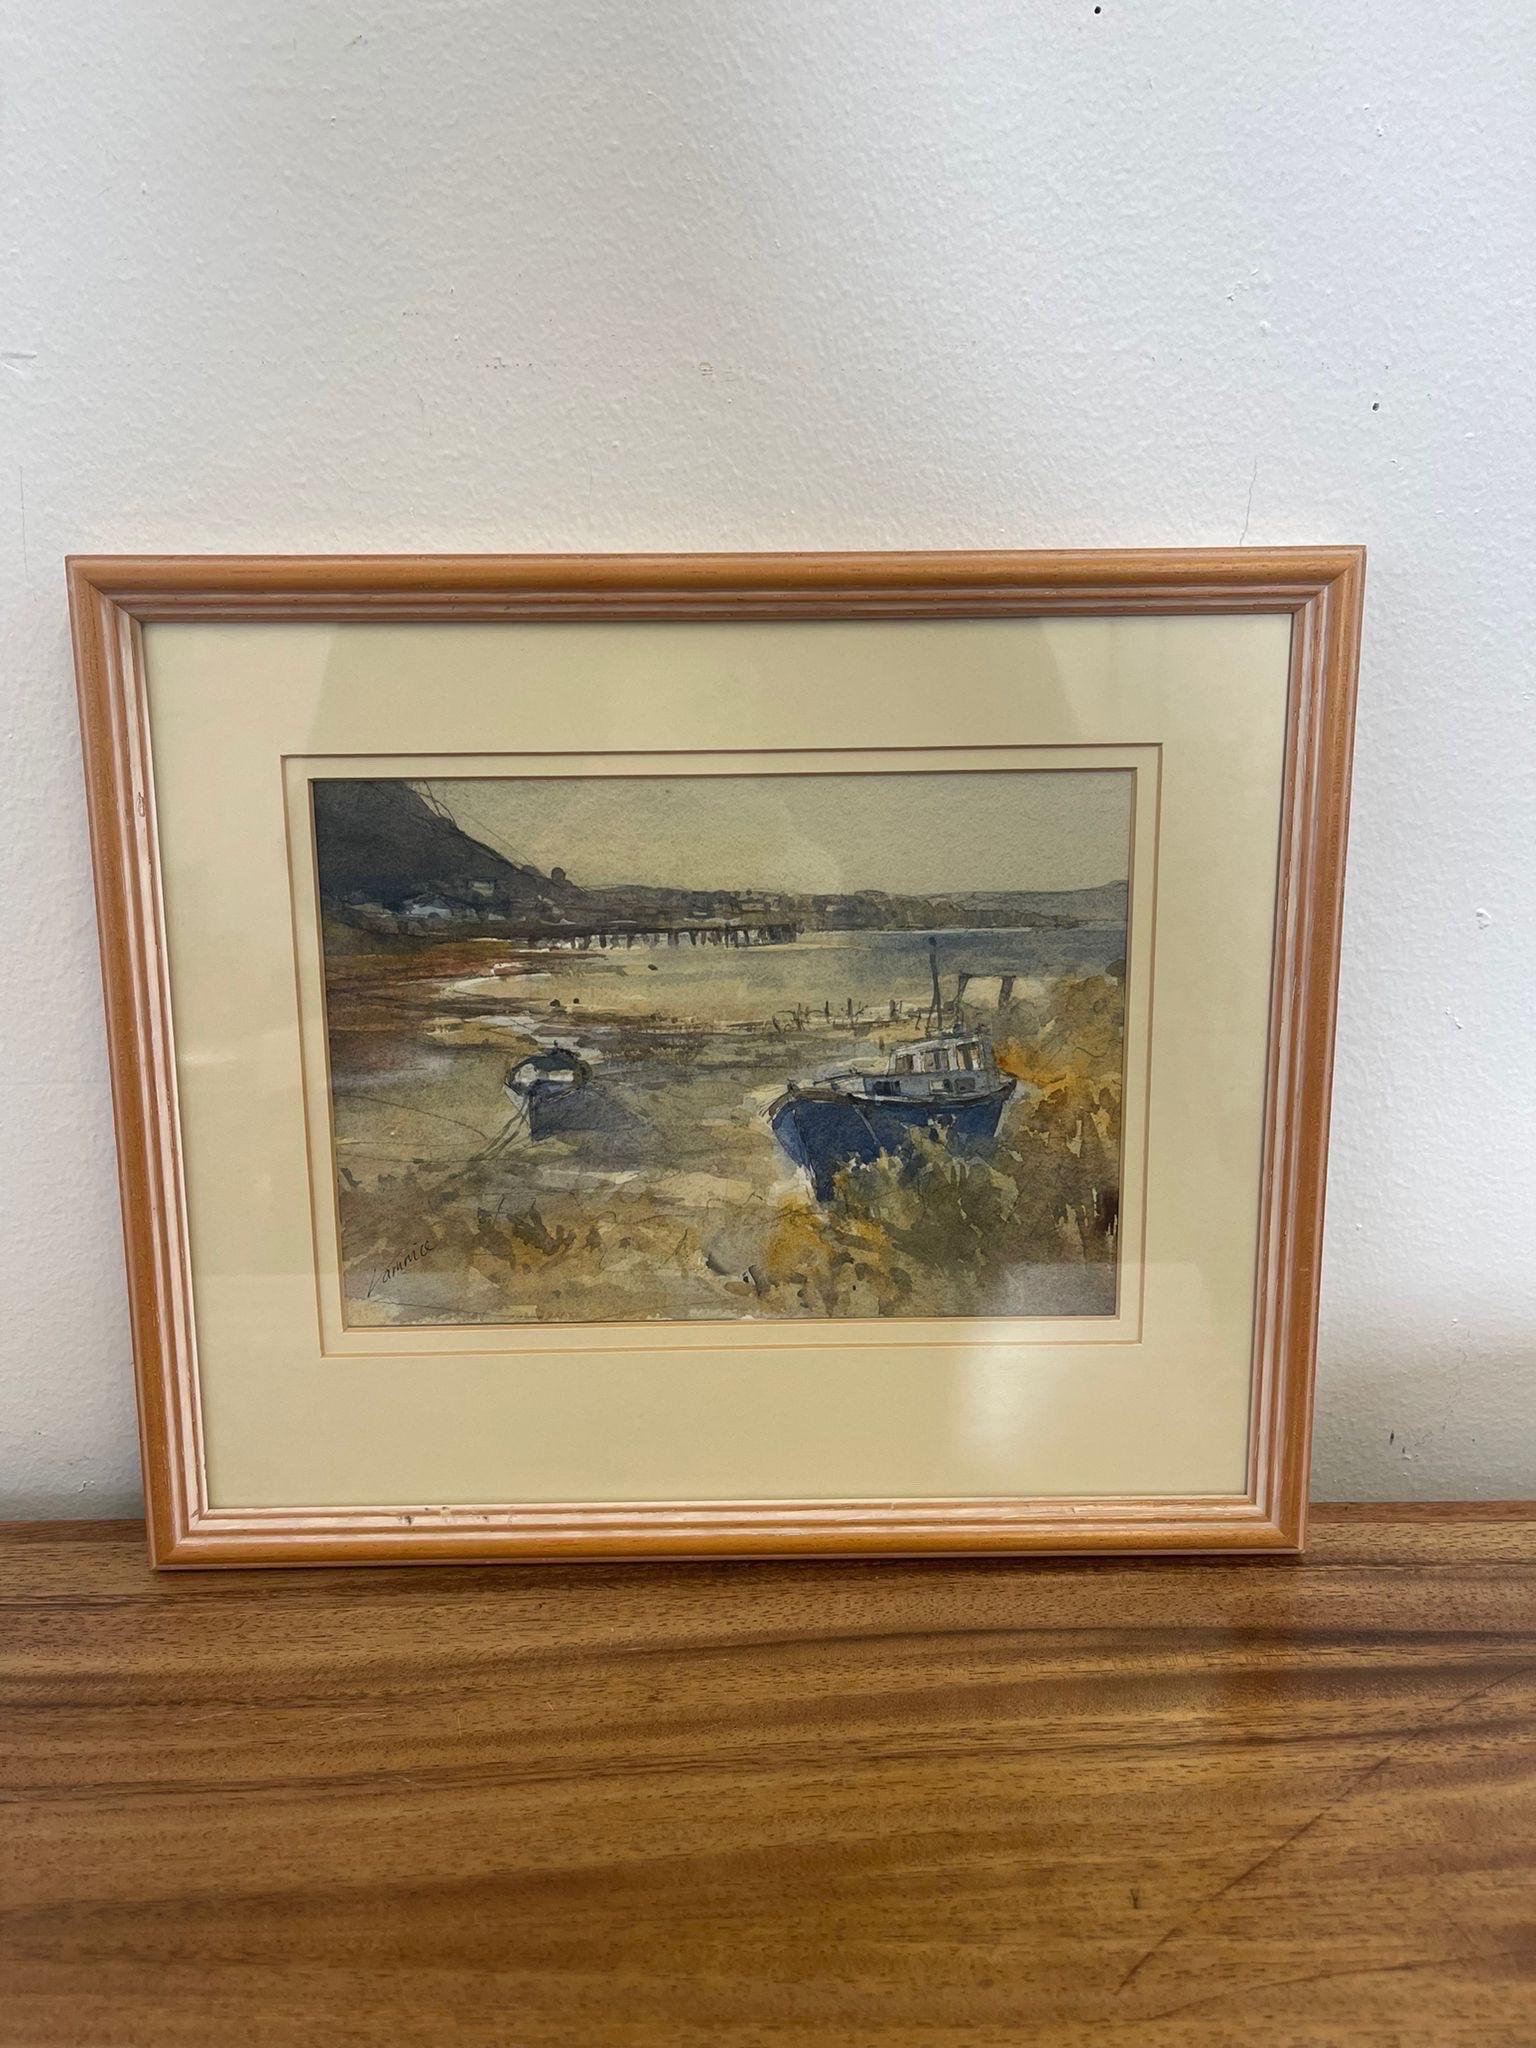 Framed and Matted within wooden frame. Unable to verify if this is a print or original. Cannot open the frame and risk the integrity of the Artwork. Vintage Condition Consistent with Age as Pictured.

Dimensions. 13 W ; 1/2 D ; 11 H